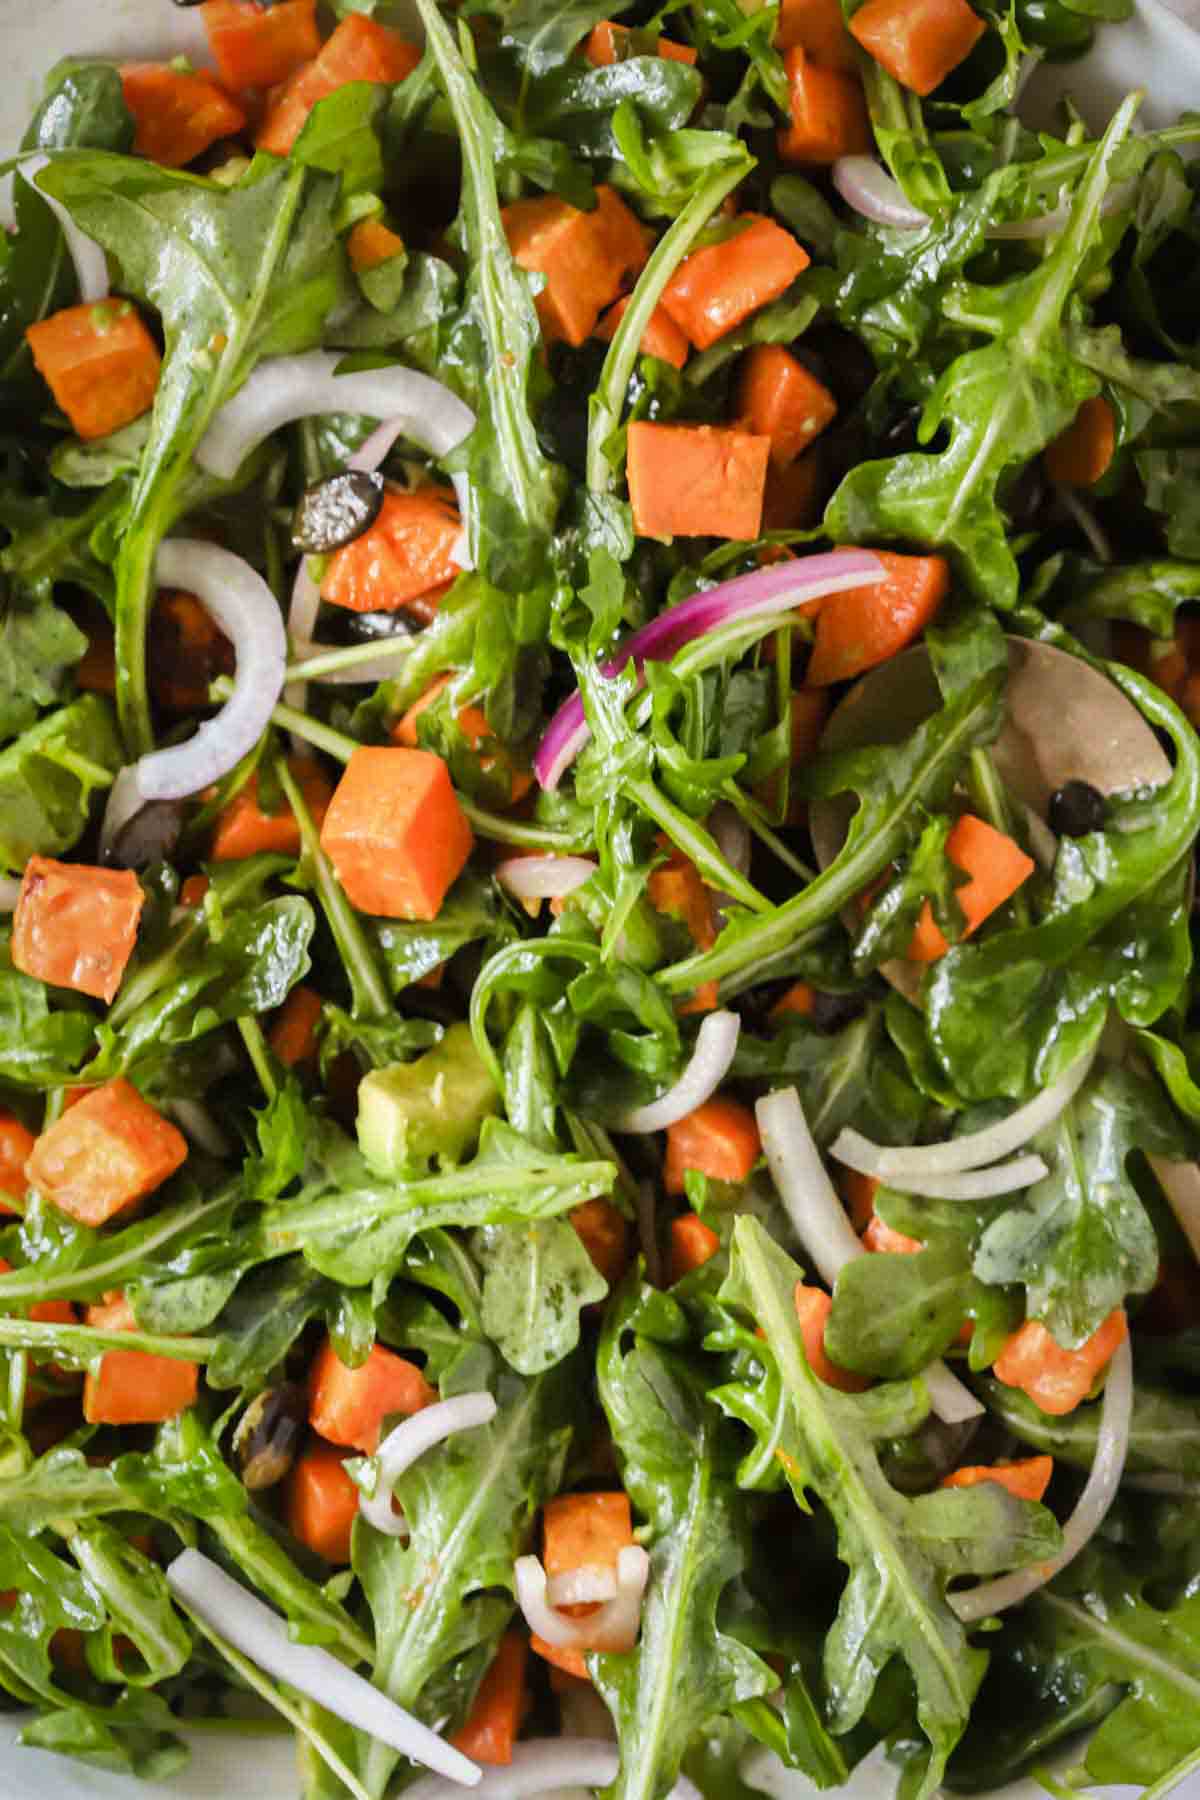 Close up image of a sweet potato salad dressed with dressing.